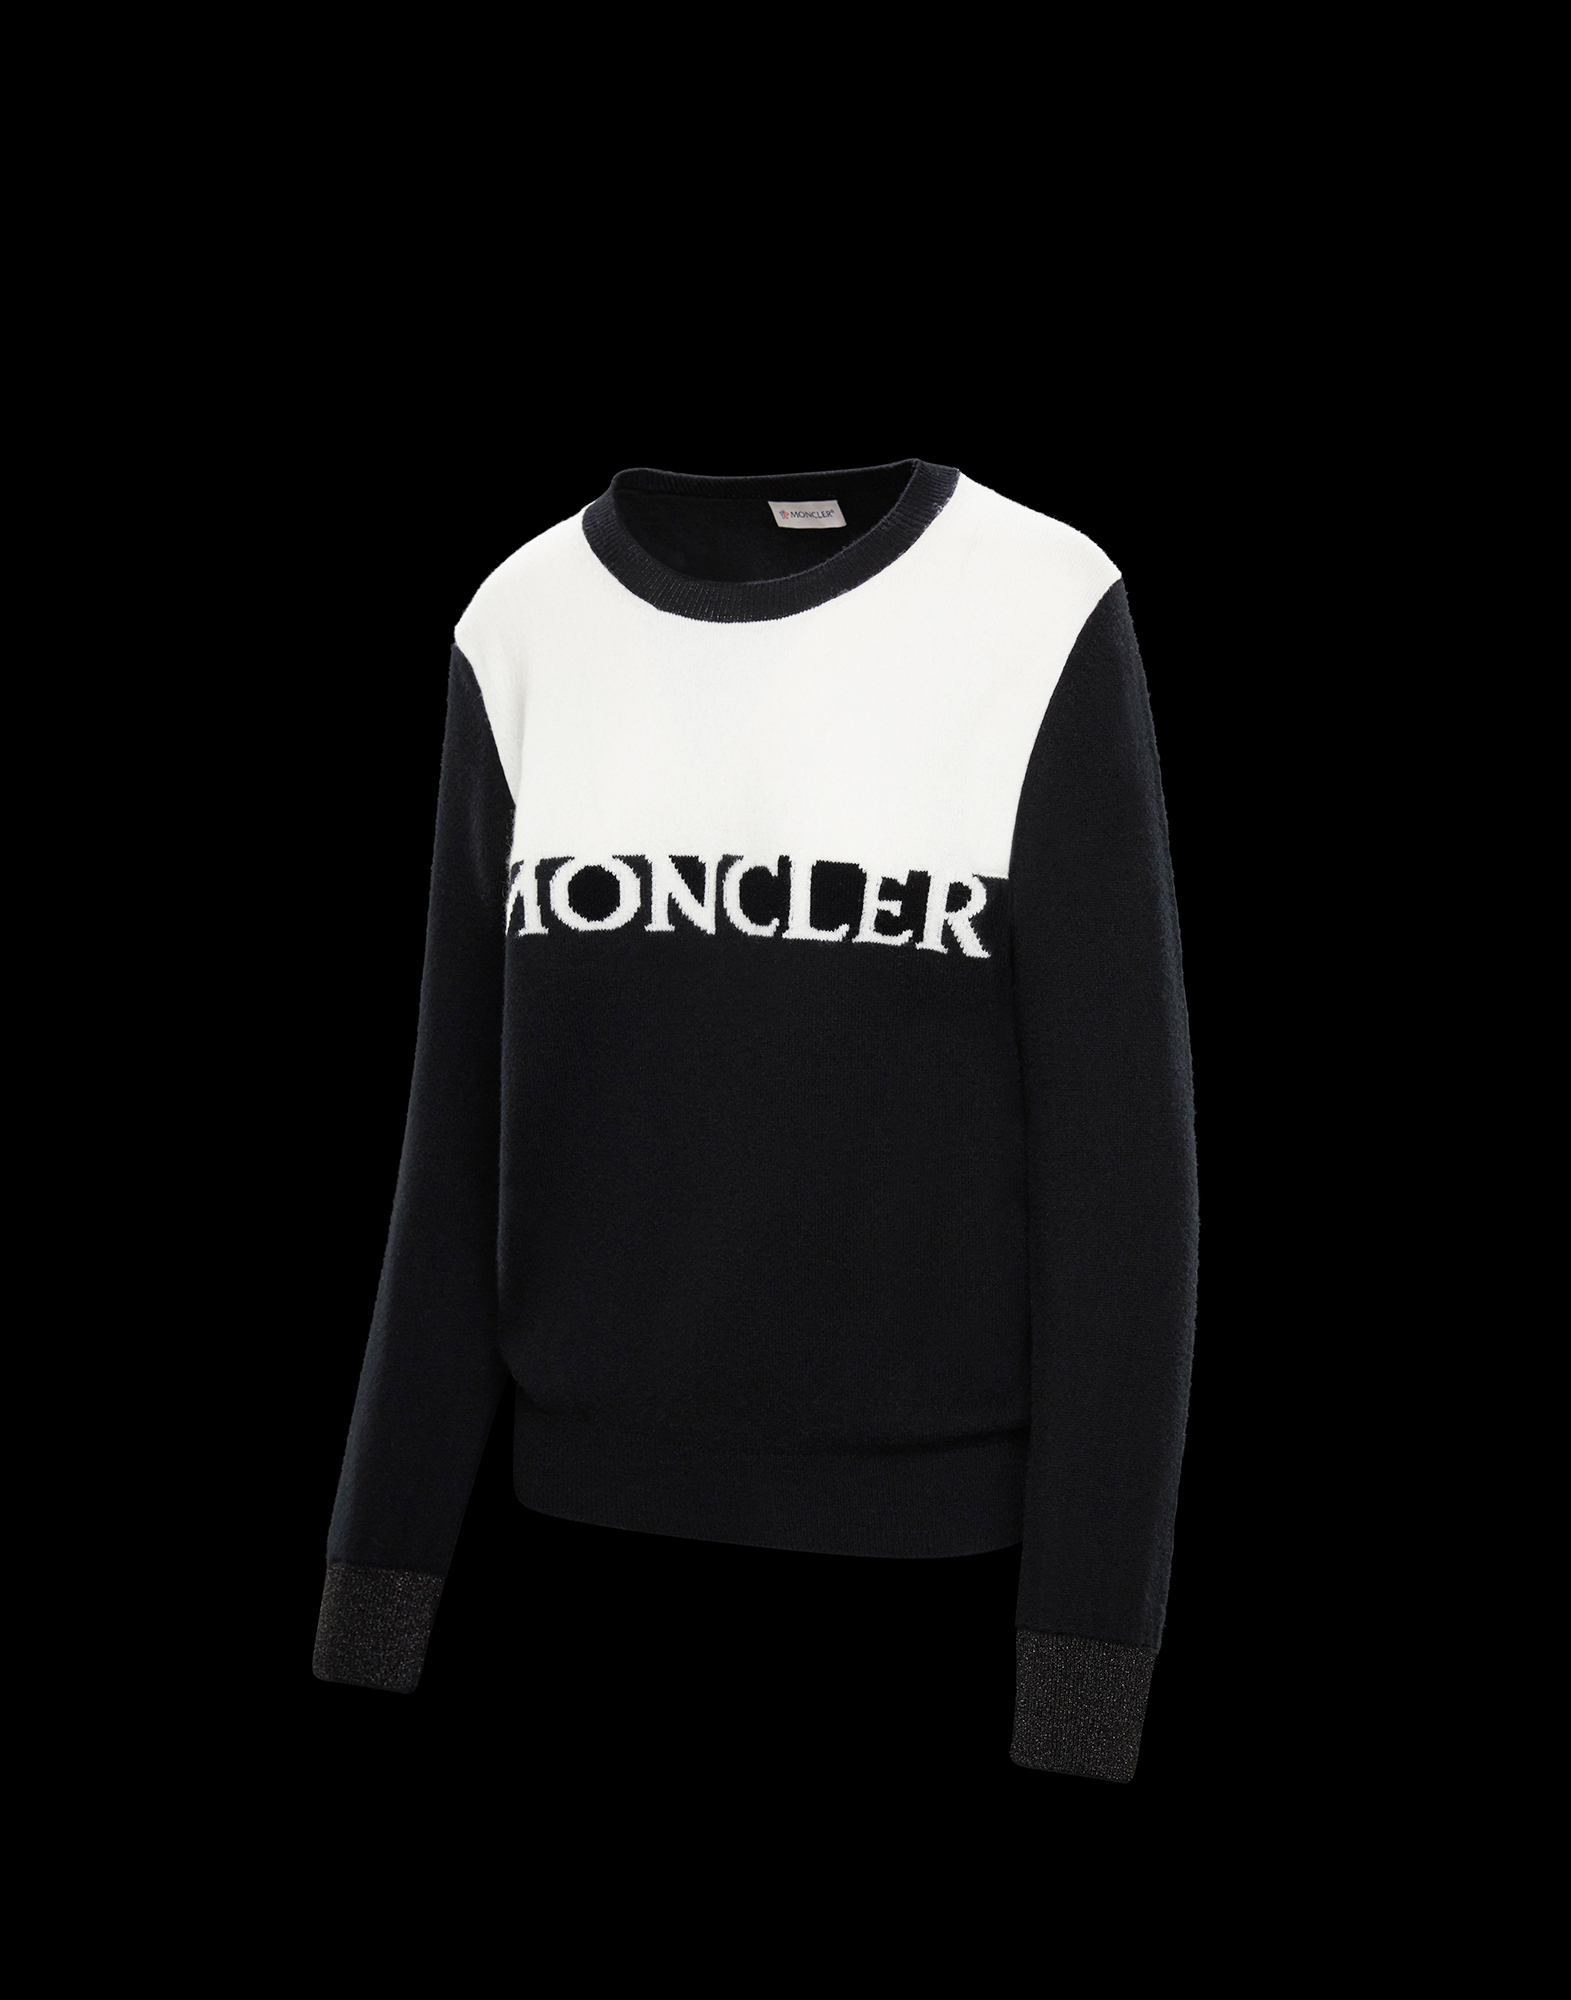 crewneck sweaters for women